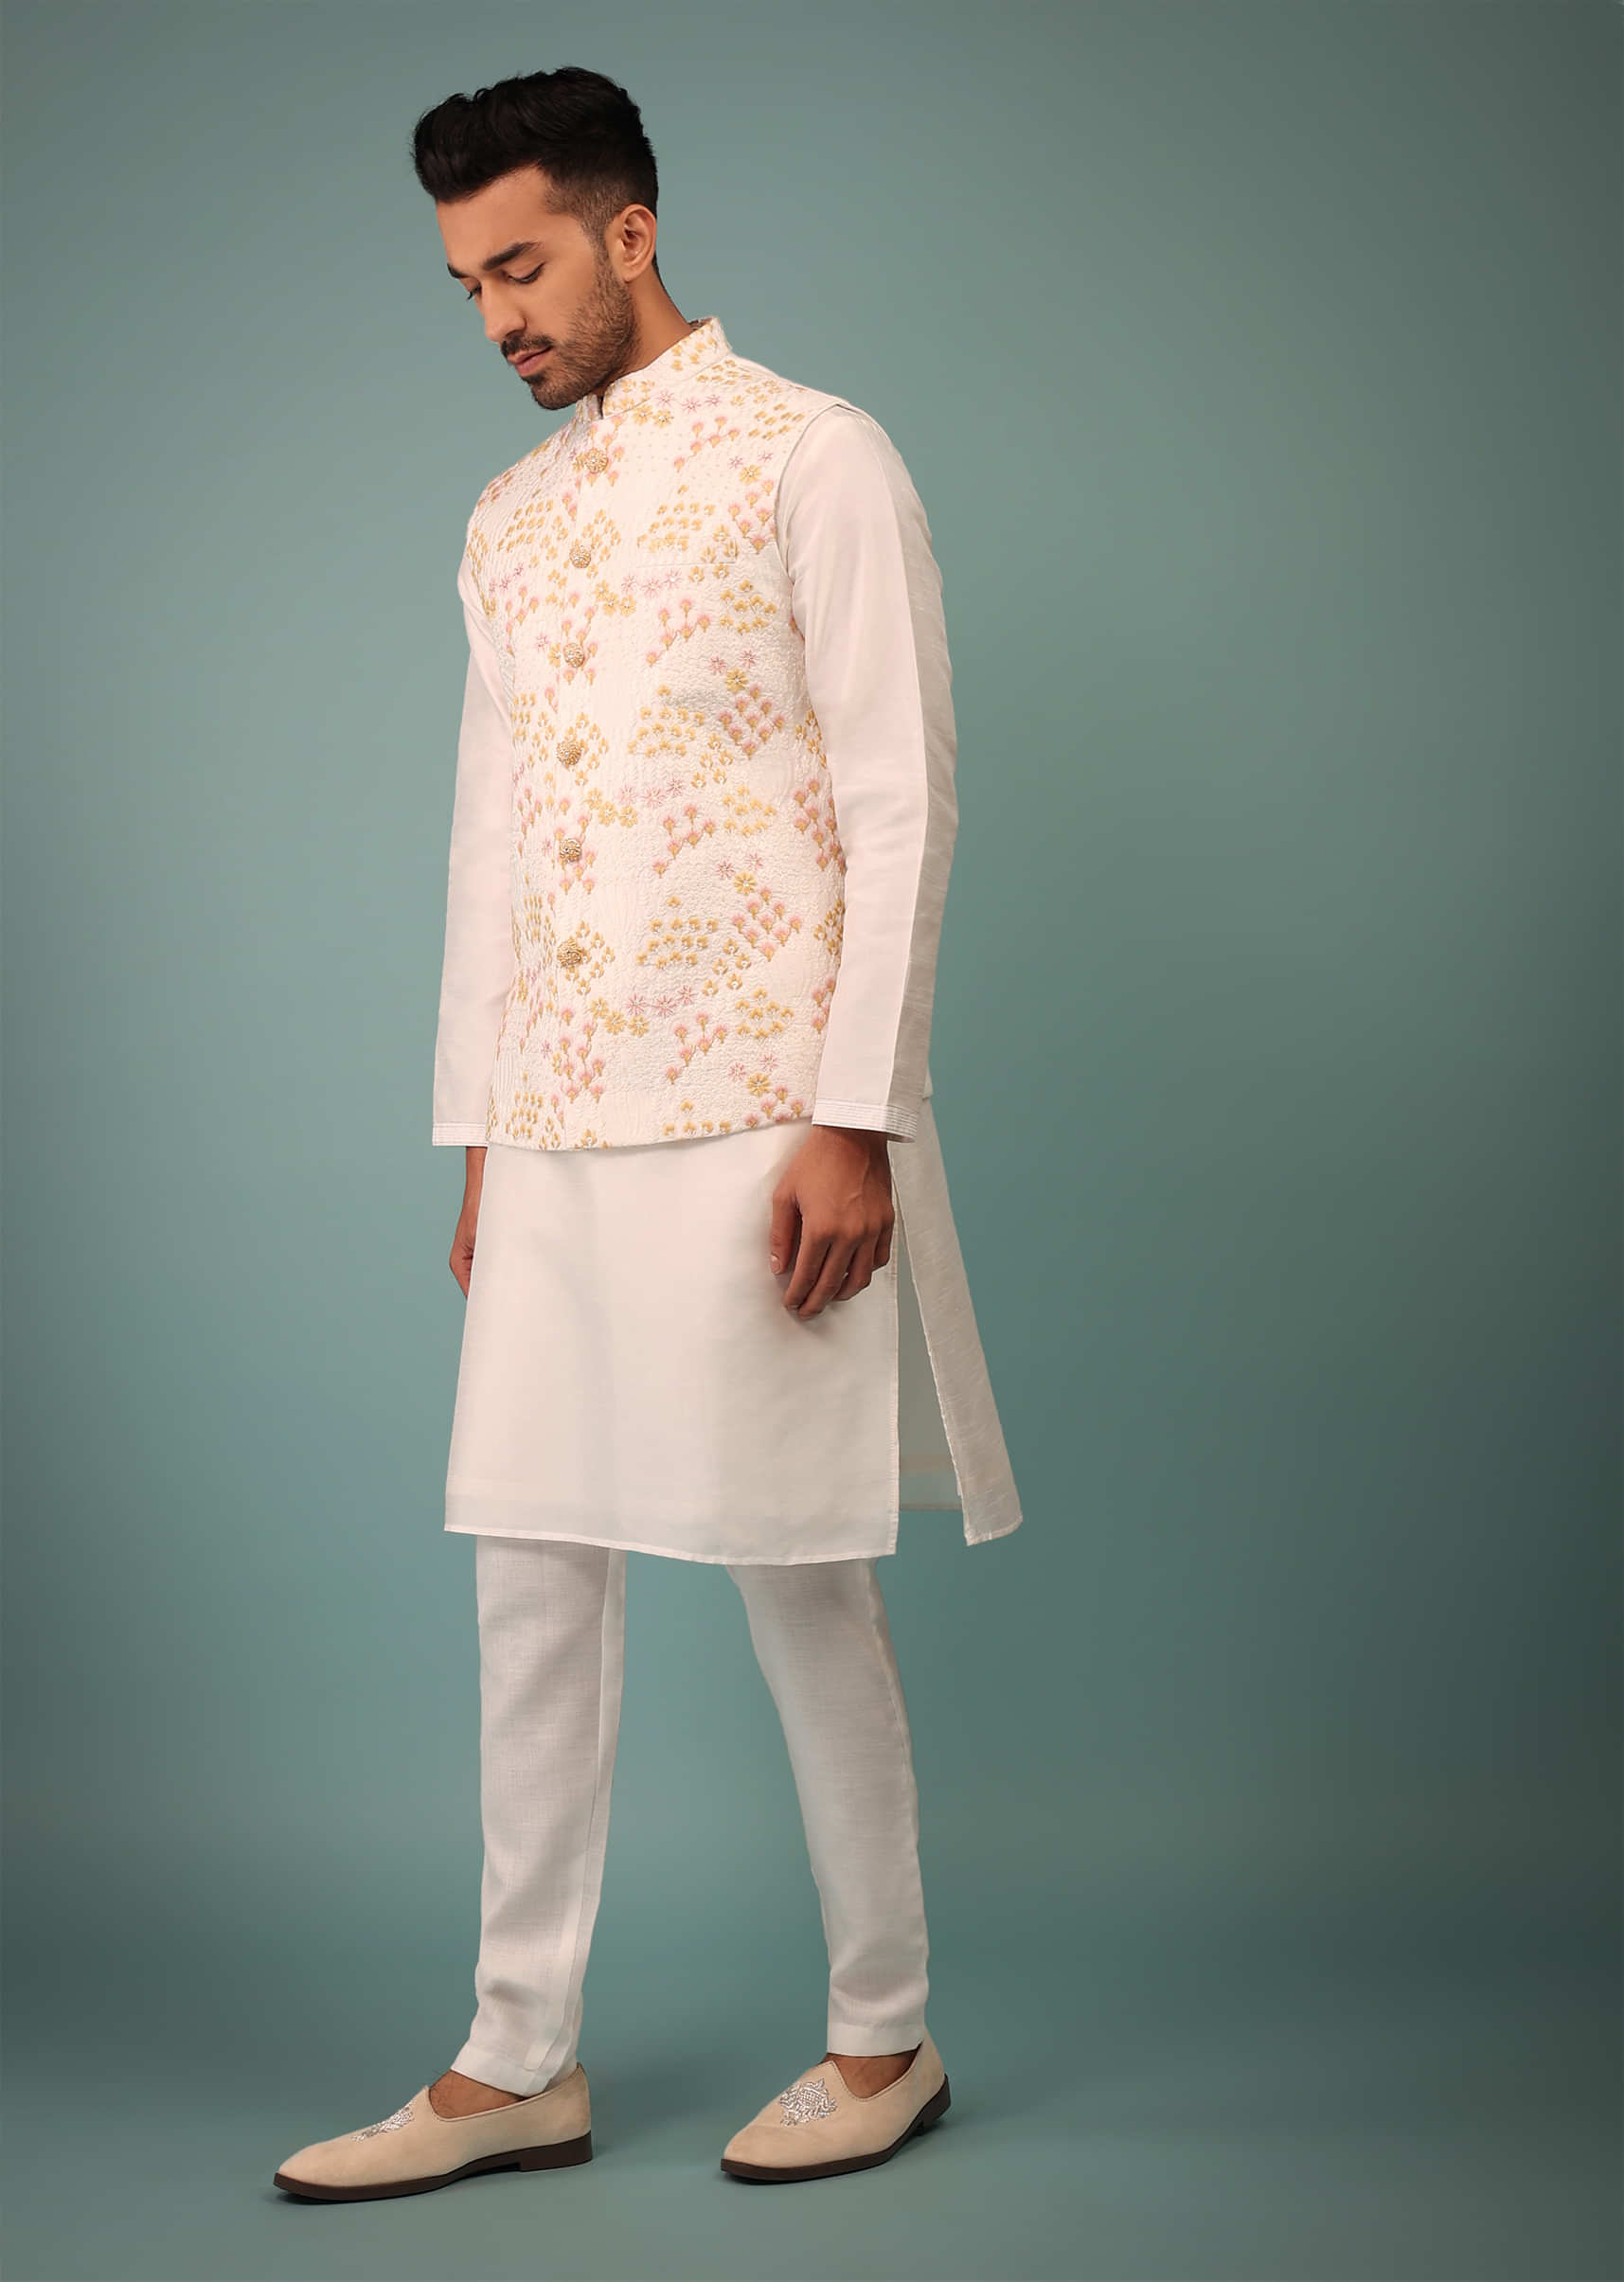 Nude White Bandi Jacket Set In Nokia Silk With Pink And Yellow Floral Embroidery